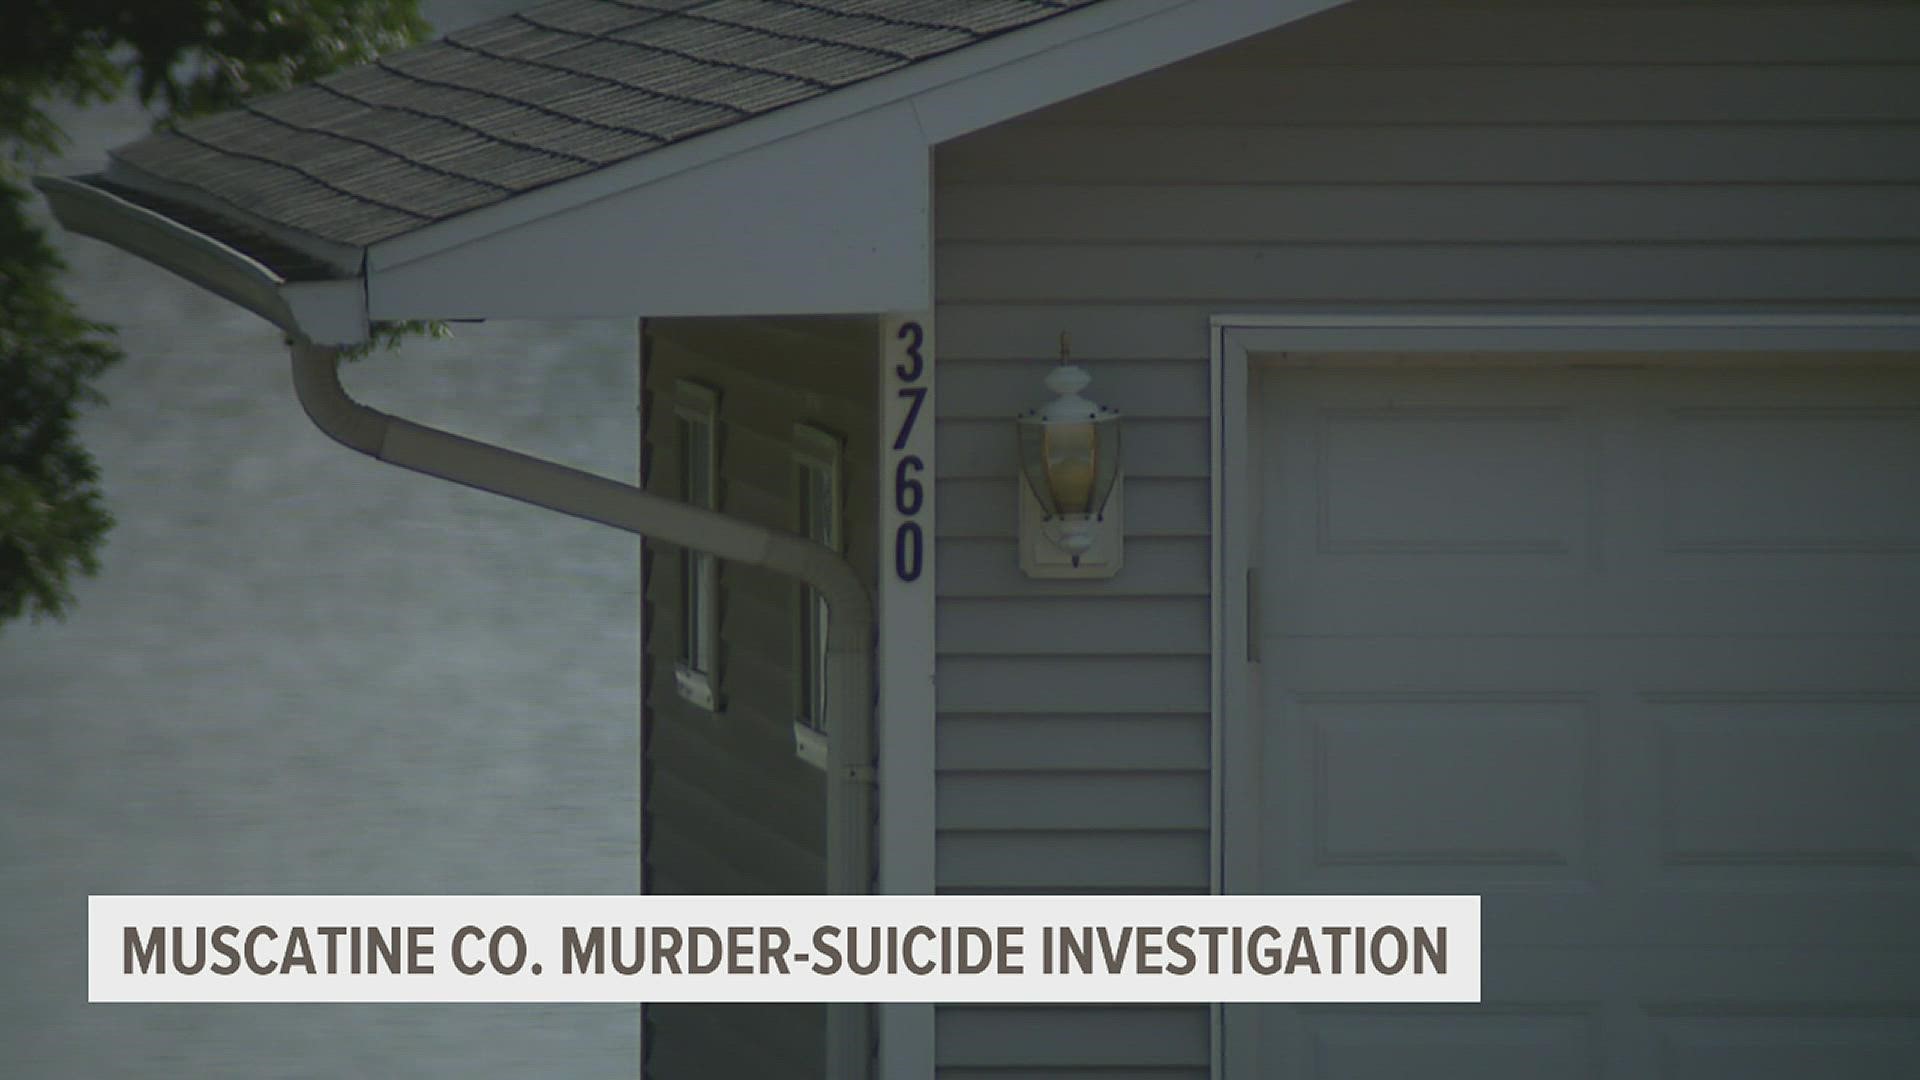 Christine Briegel, 74, was found murdered in a home along the 3700 block of Midway Beach Road in Muscatine on Monday, according to the sheriff's office.